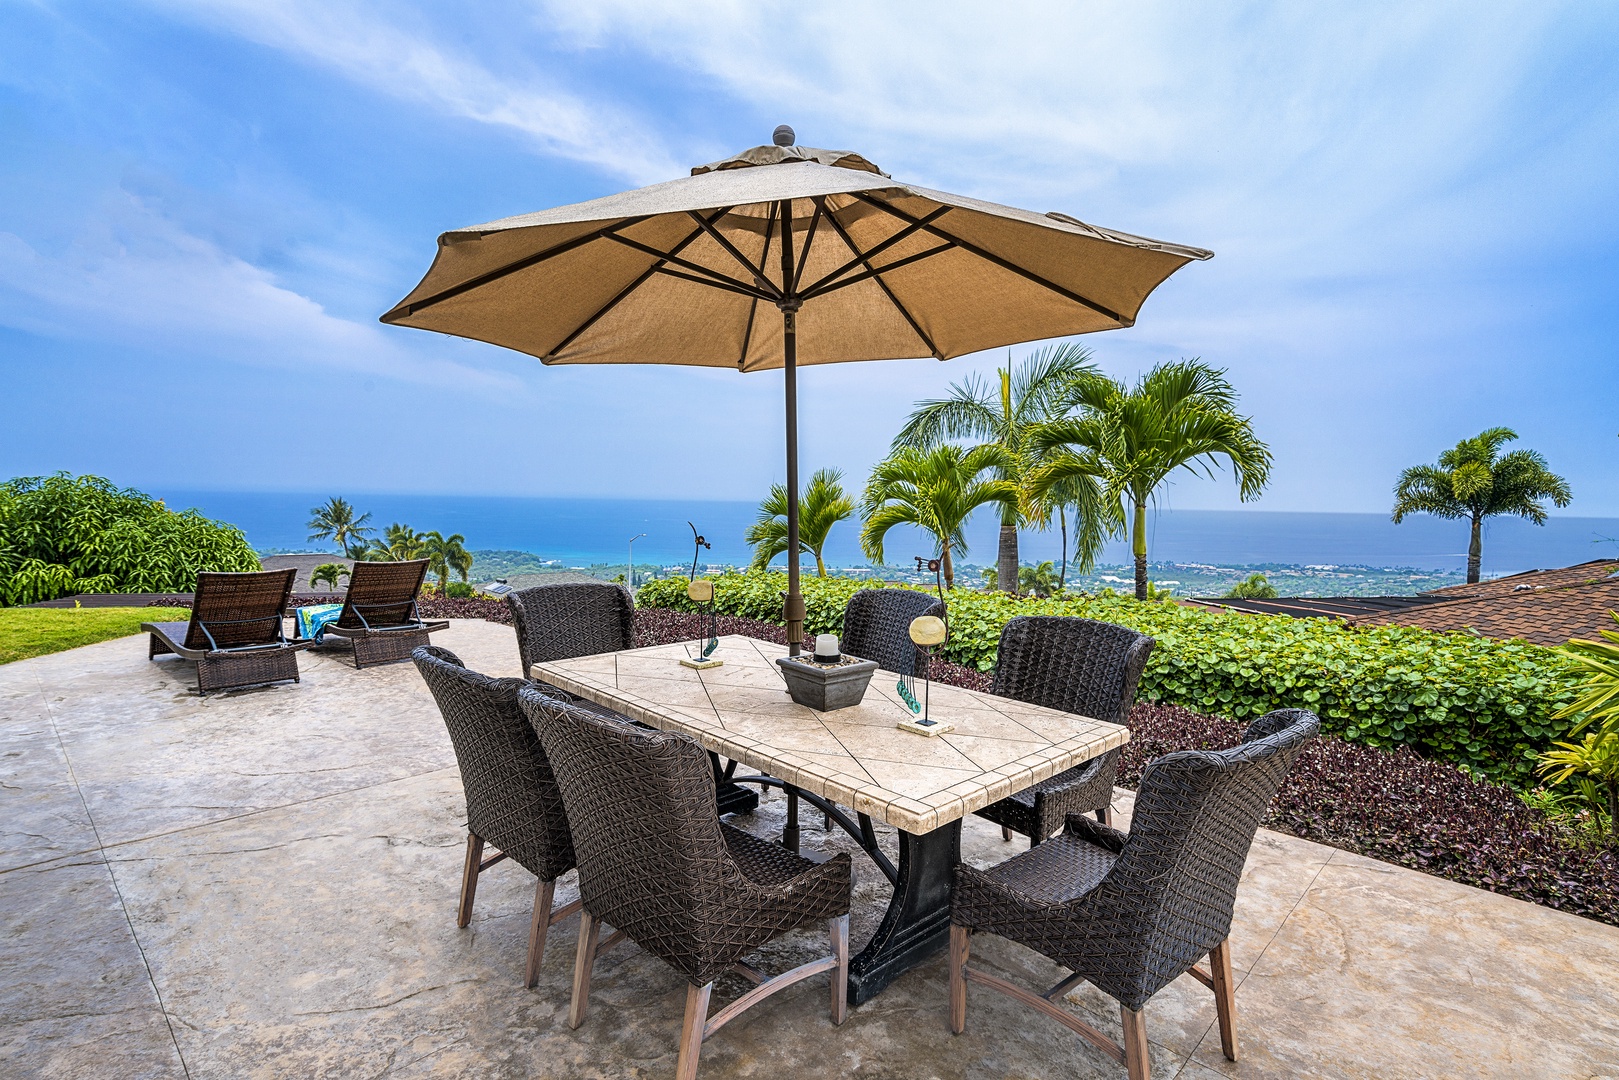 Kailua Kona Vacation Rentals, Sunset Hale - Outdoor dining for the entire group!